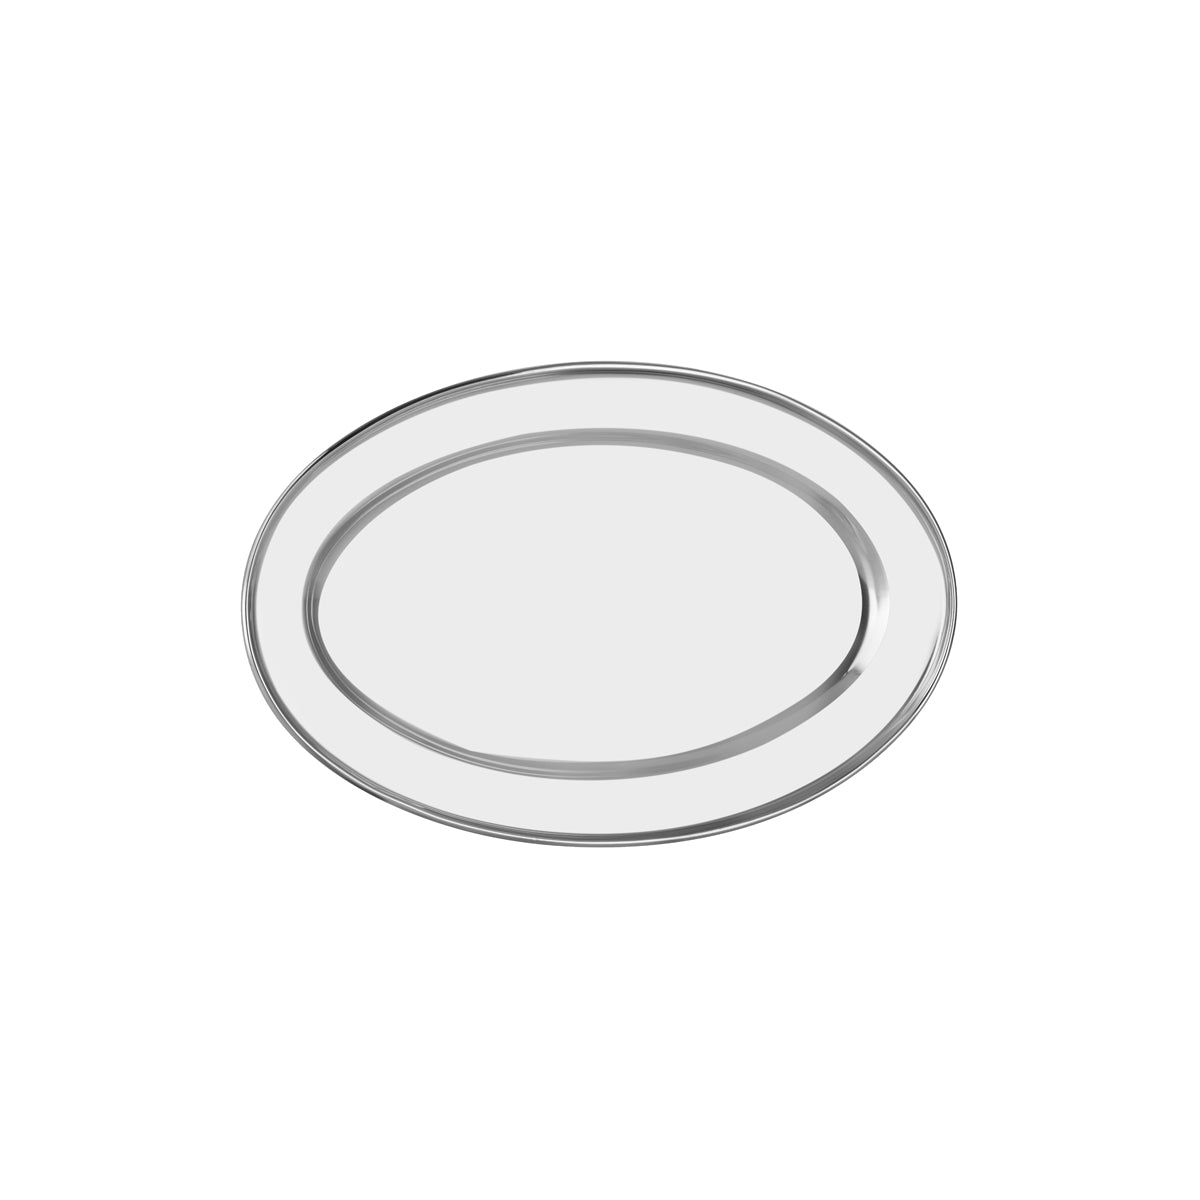 70716 Chef Inox Oval Platter Rolled Edge Stainless Steel 400x315mm Tomkin Australia Hospitality Supplies